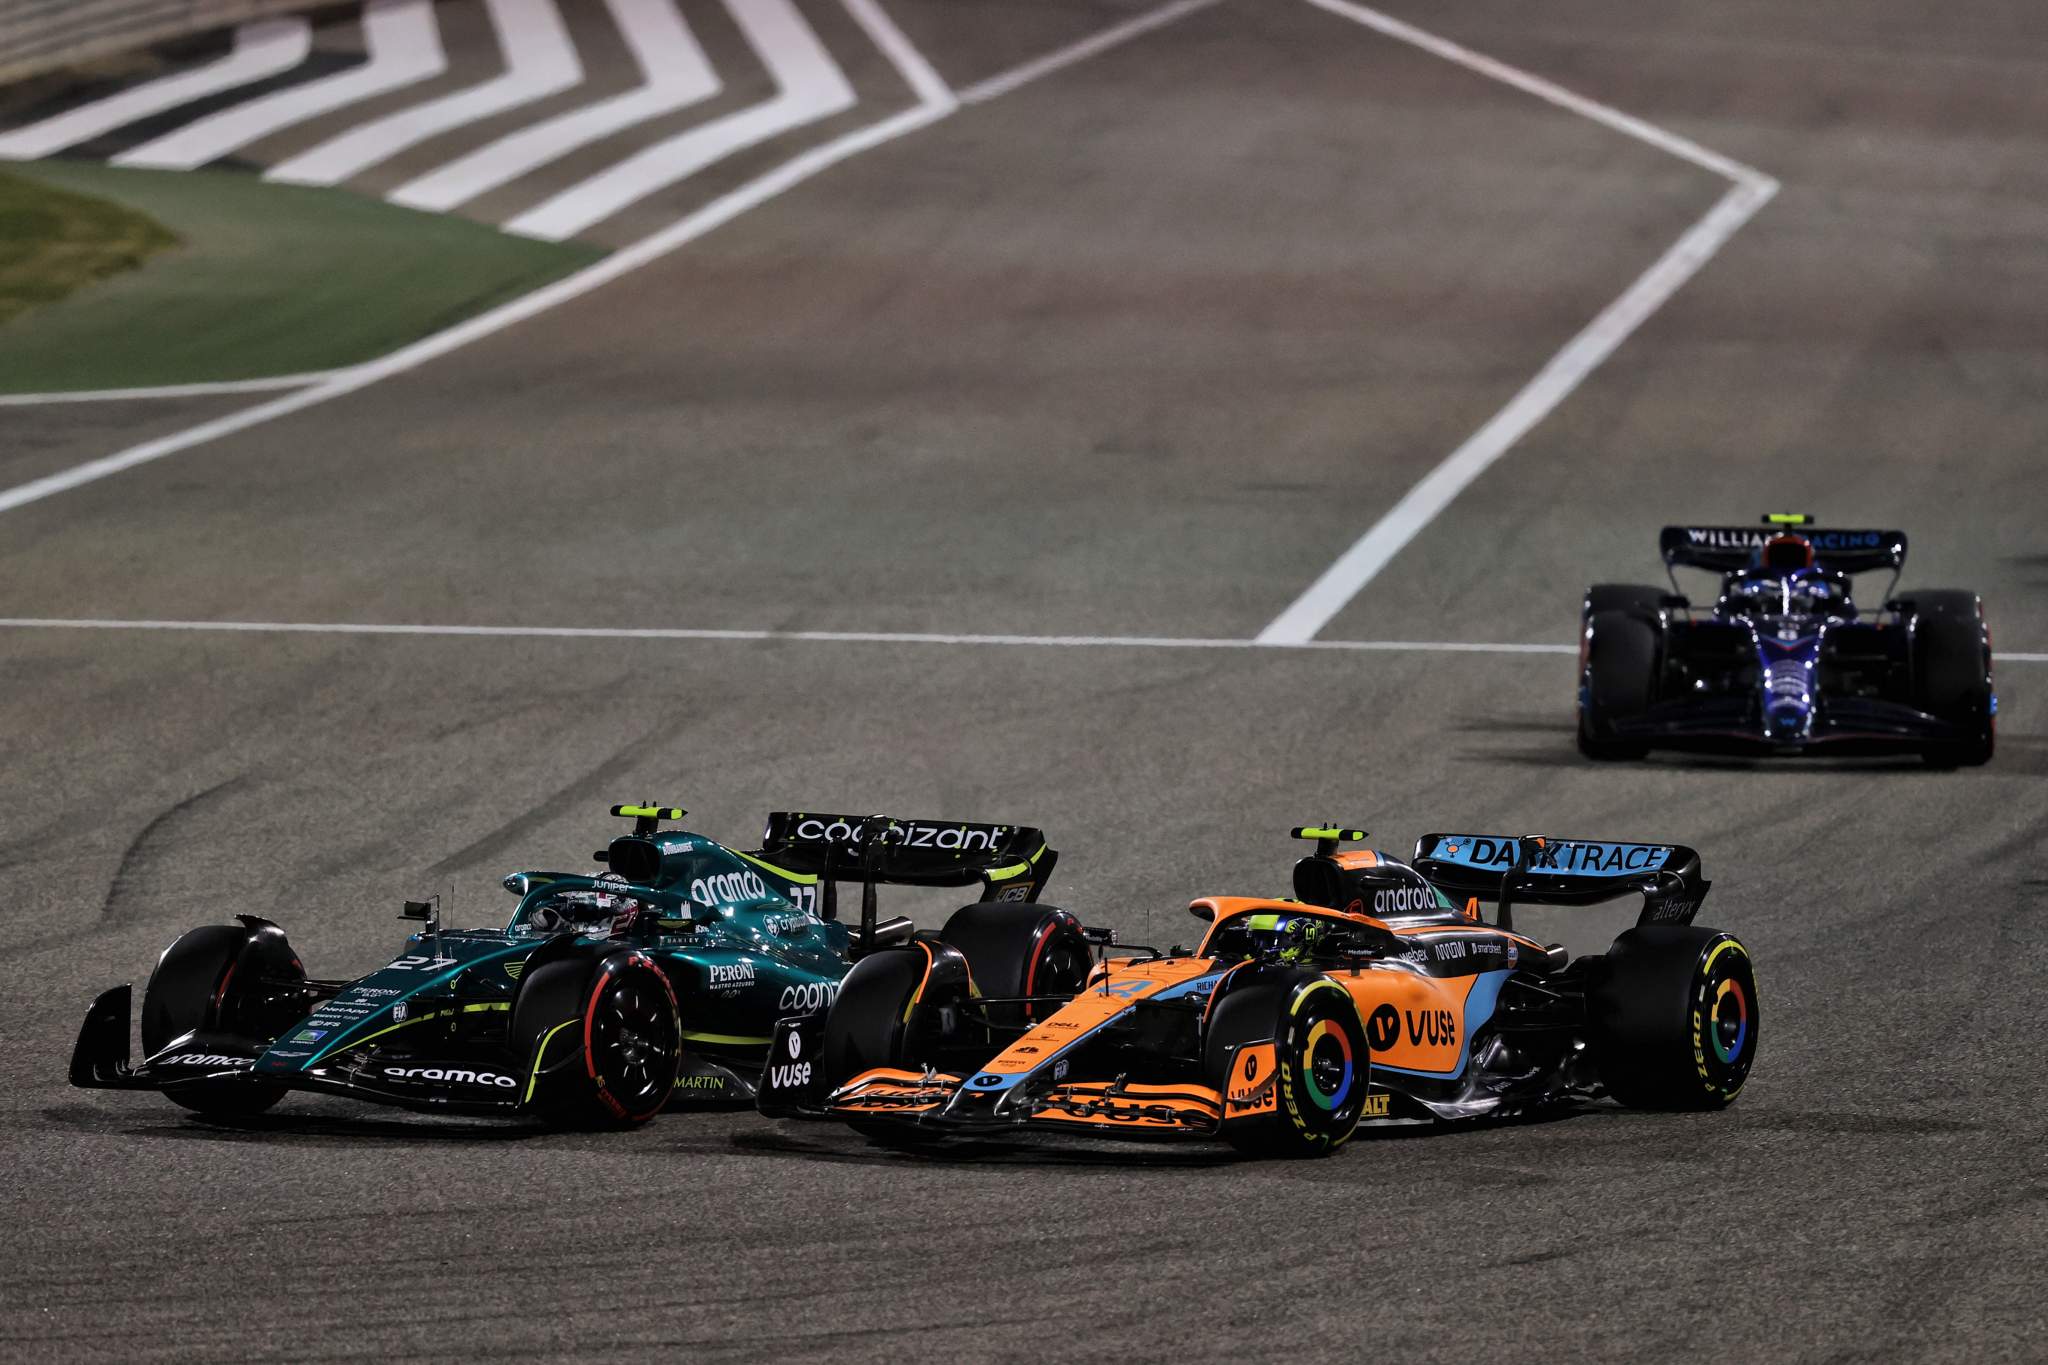 Lessons for McLaren to learn from its disappointing season